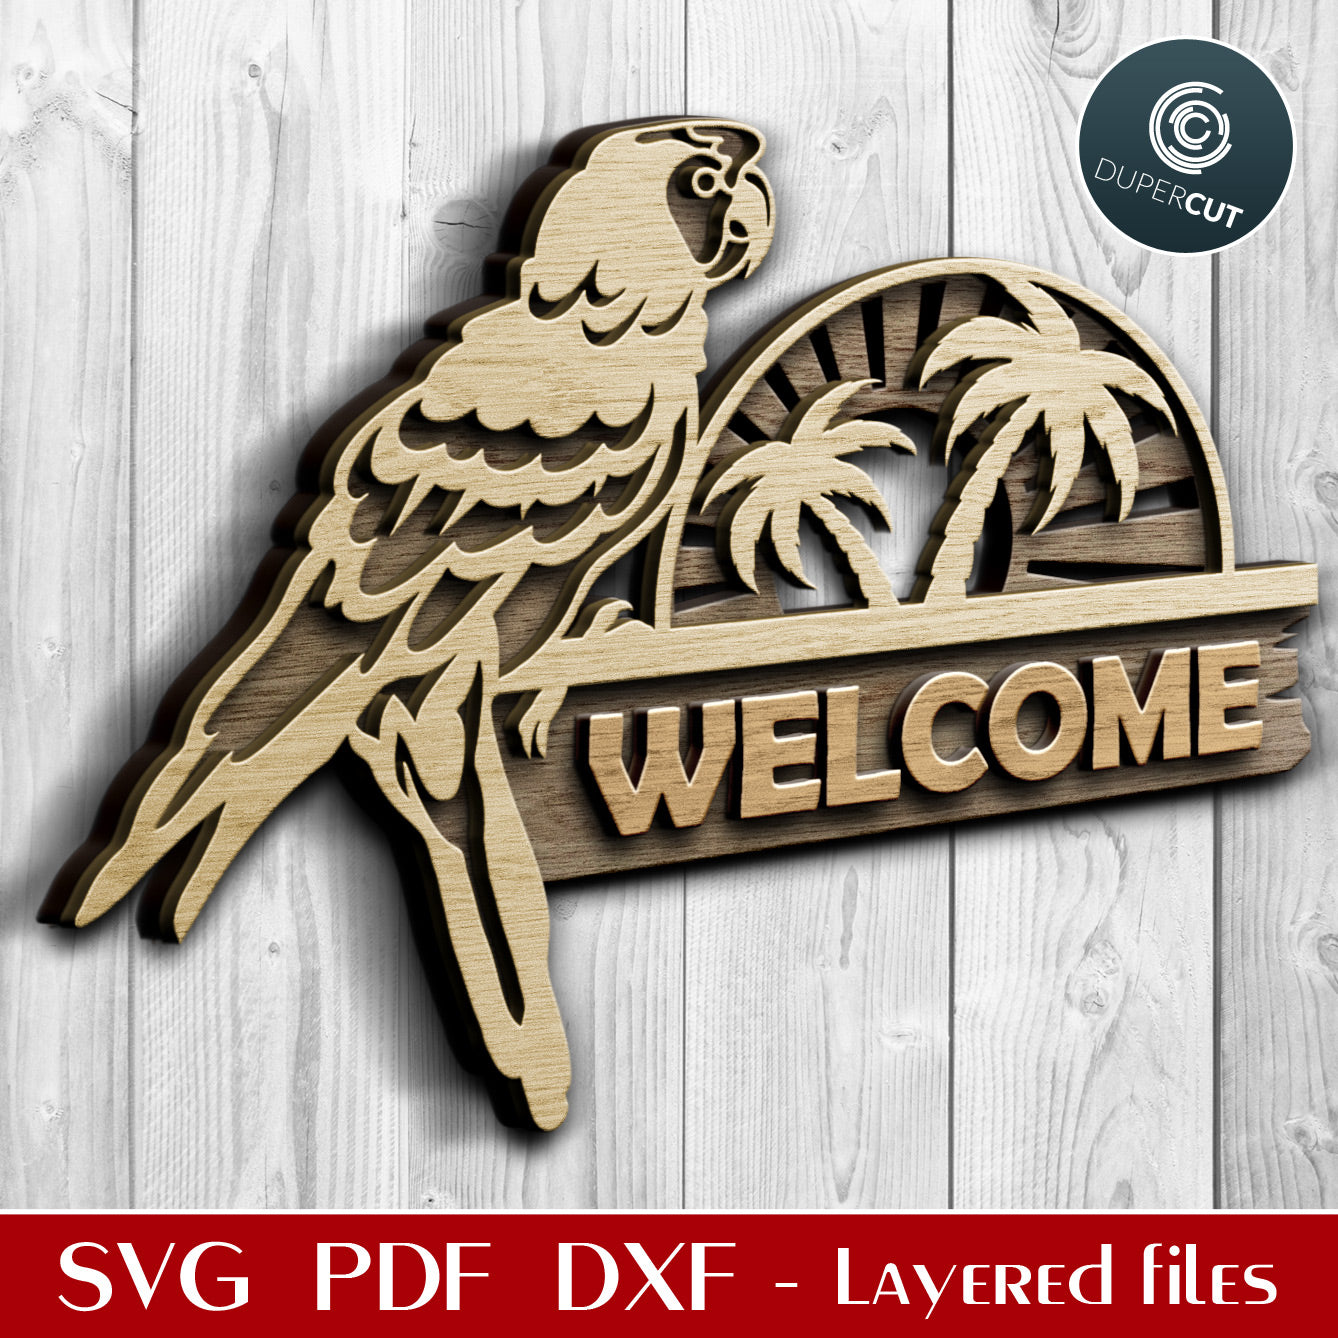 Welcome signs bundle - tropical parrot welcome - dual layer laser cutting files - SVG PDF DXF vector designs for Glowforge, Cricut, Silhouette Cameo, CNC plasma machines by DuperCut